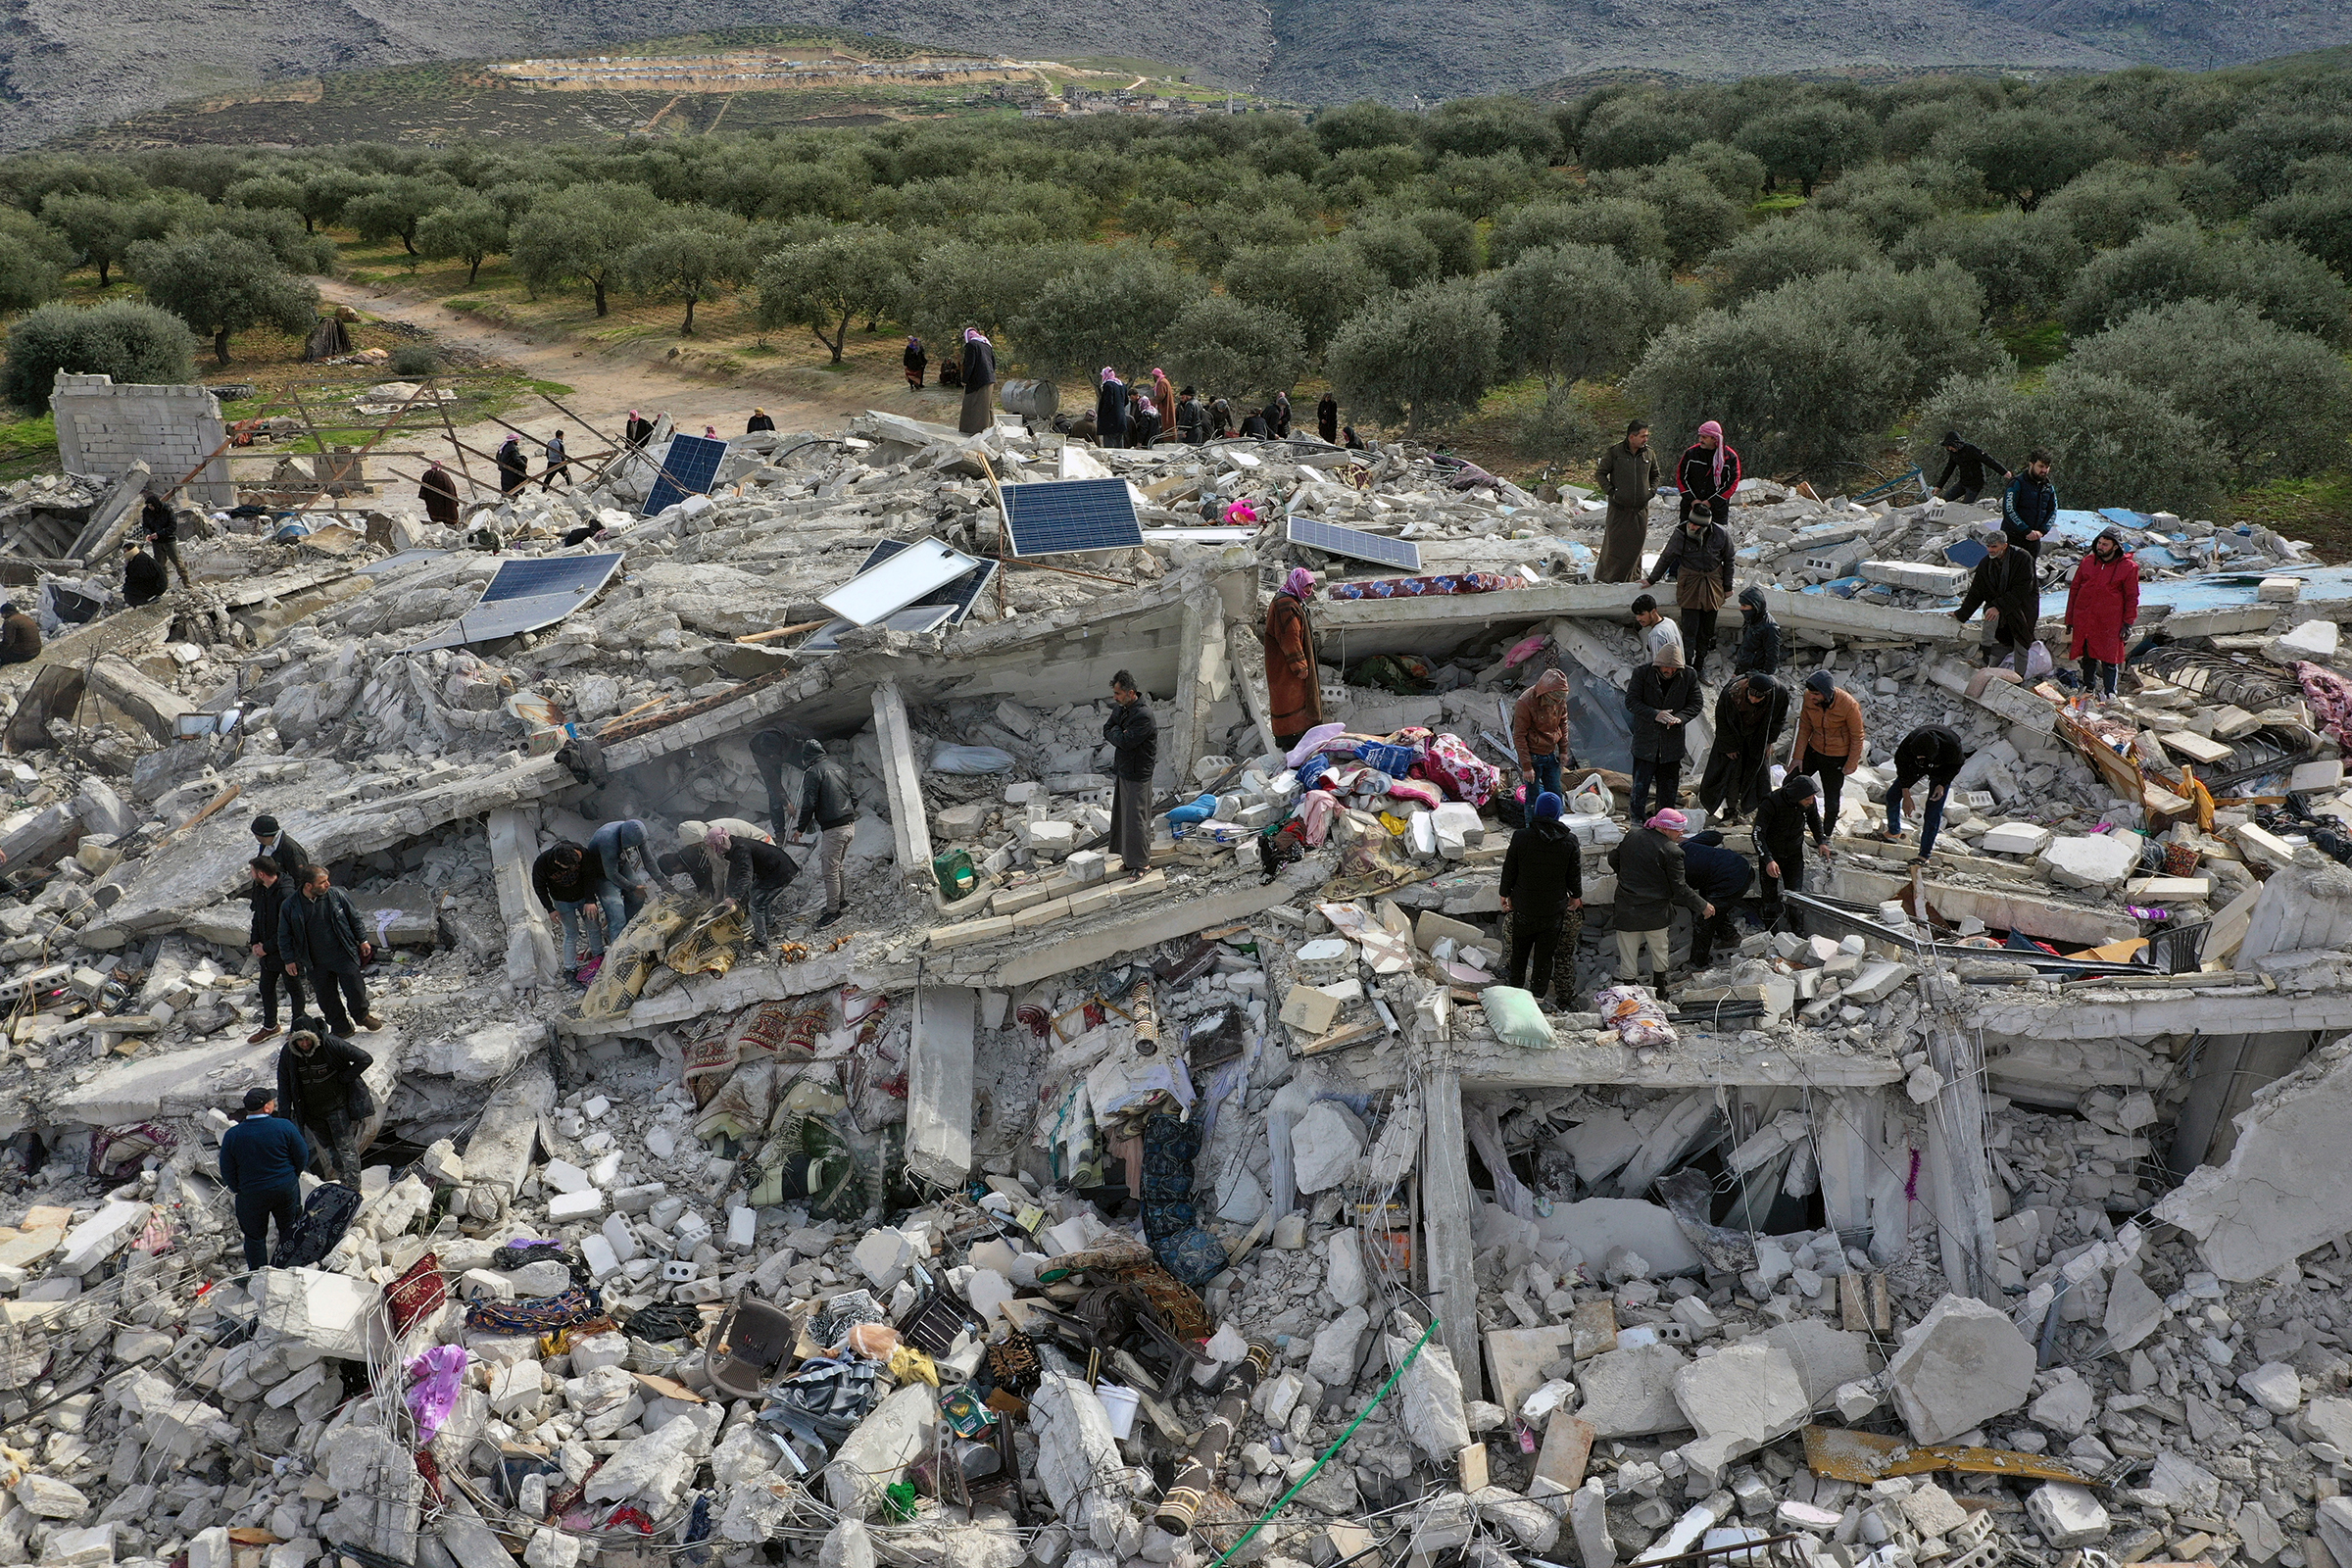 Collapsed buildings in the town of Harem near the Turkish border, Idlib province, Syria. (Ghaith Alsayed—AP)